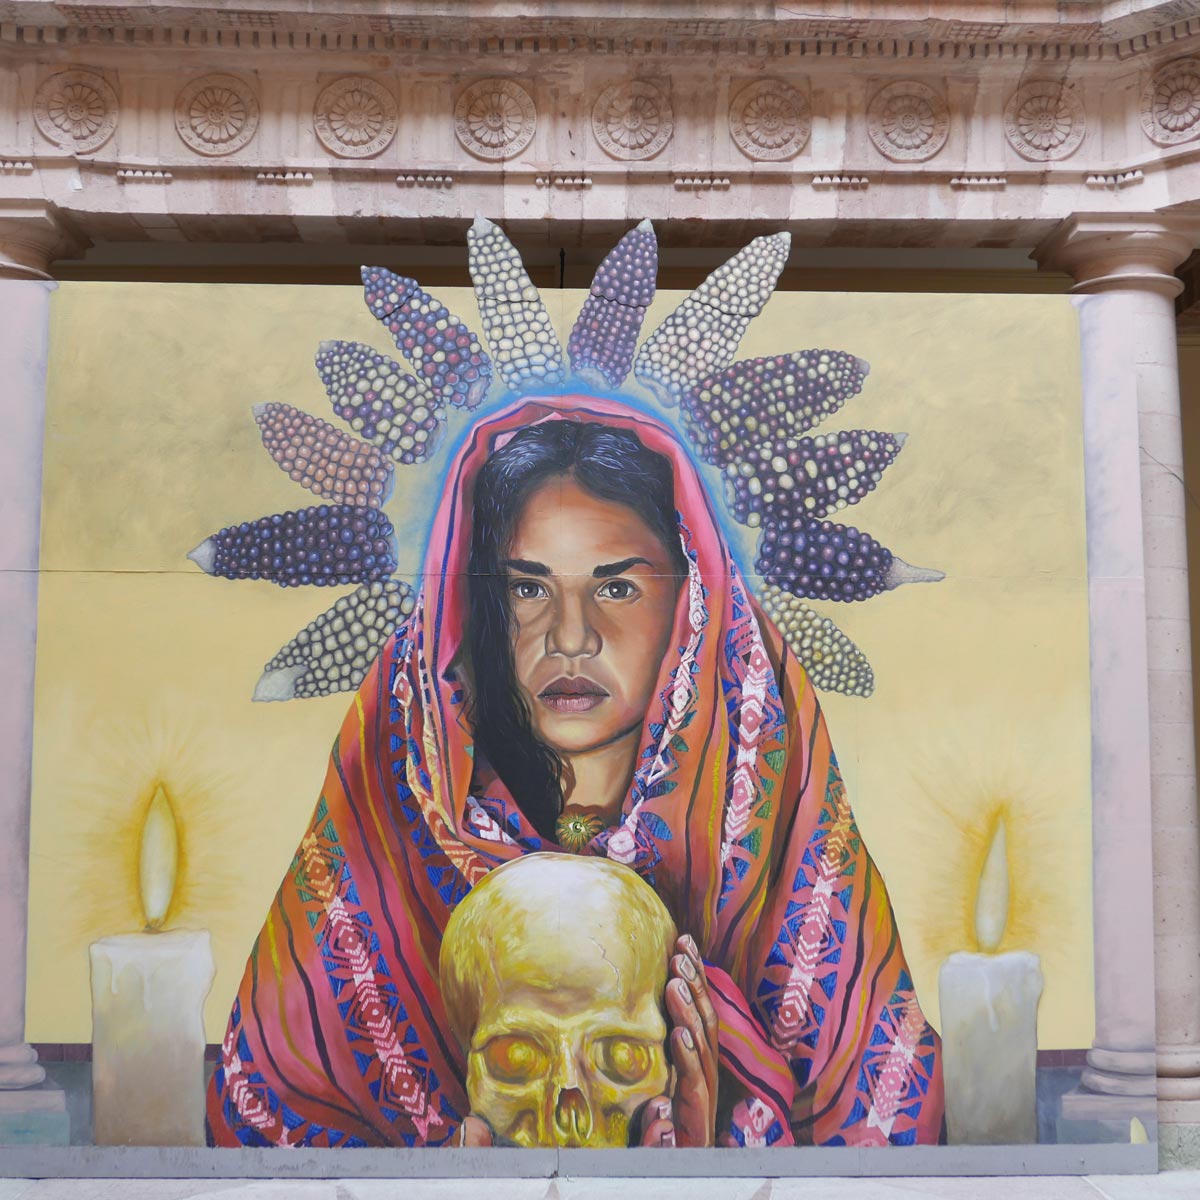 Painting in the courtyard of the Casa de Conde Rul museum in Guanajuato